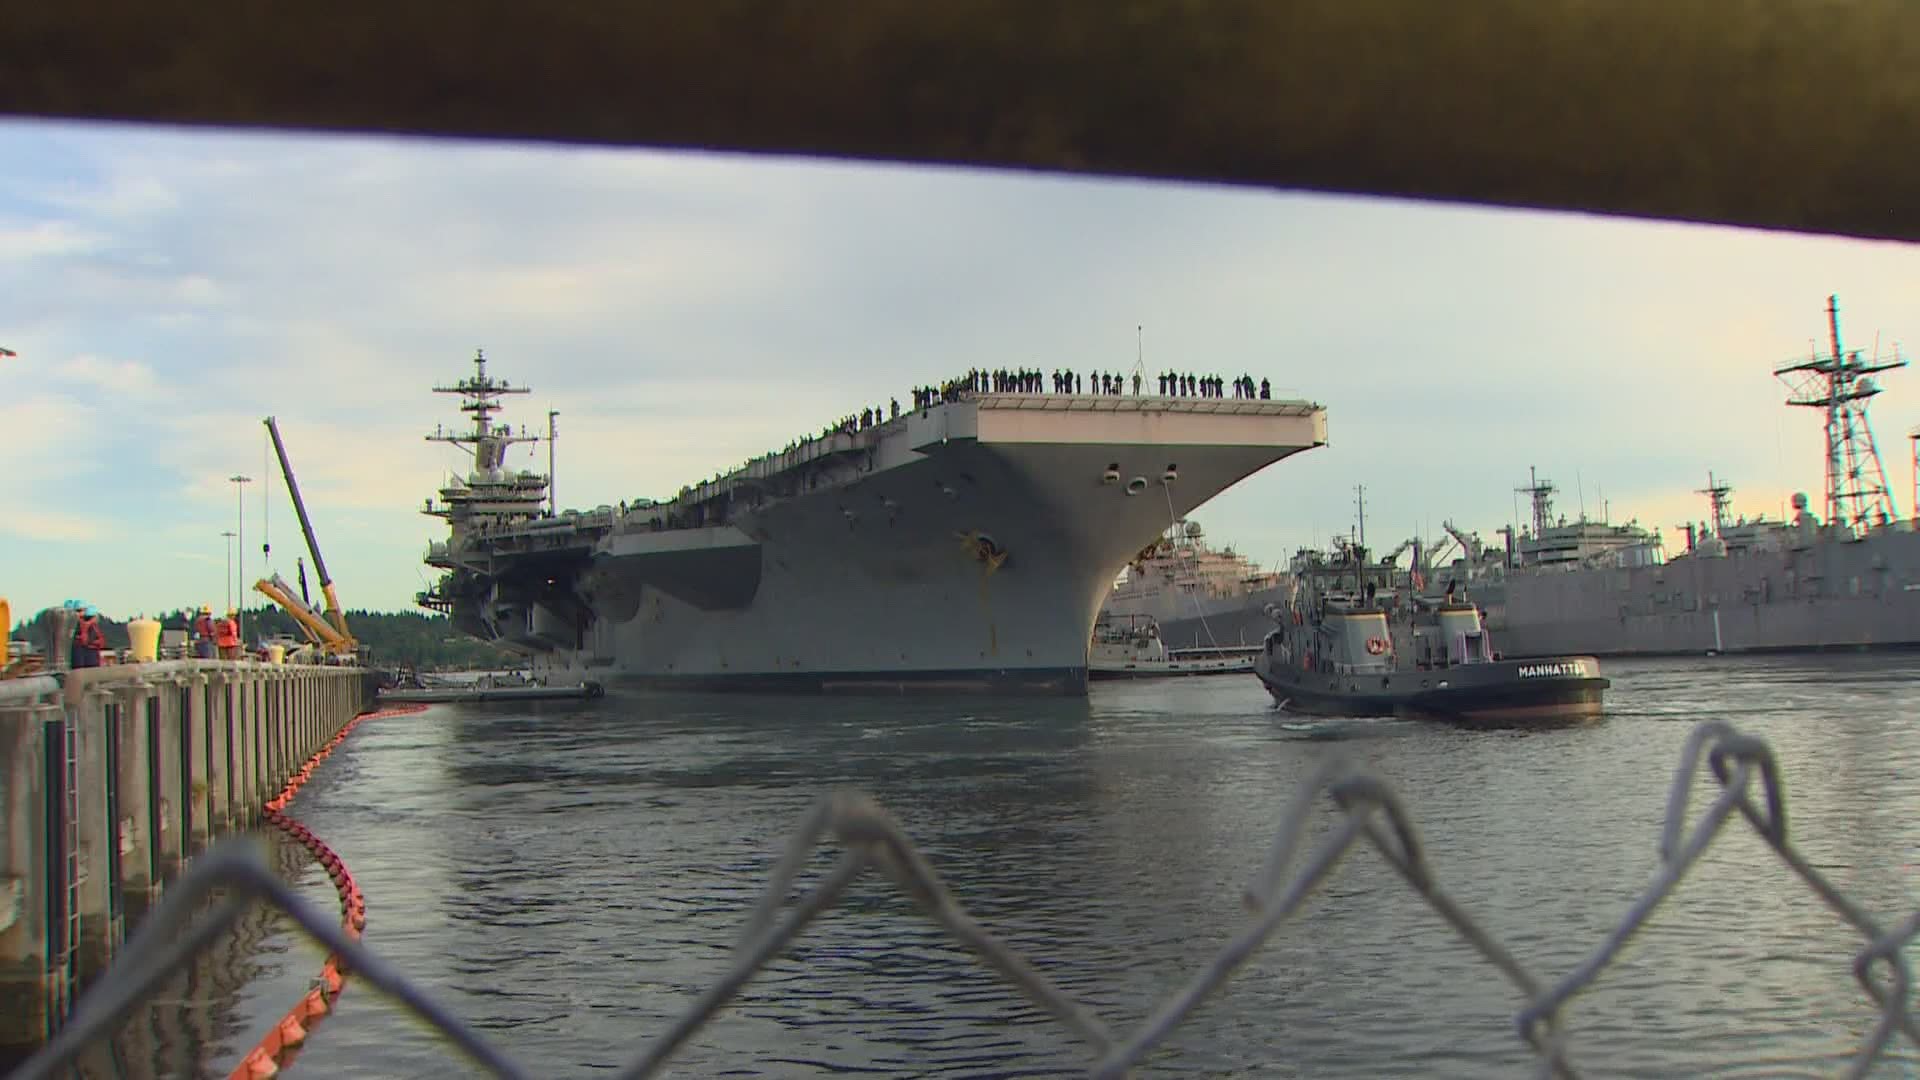 The boat will be undergoing maintenance, upgrades and improvements at Naval Base Kitsap.